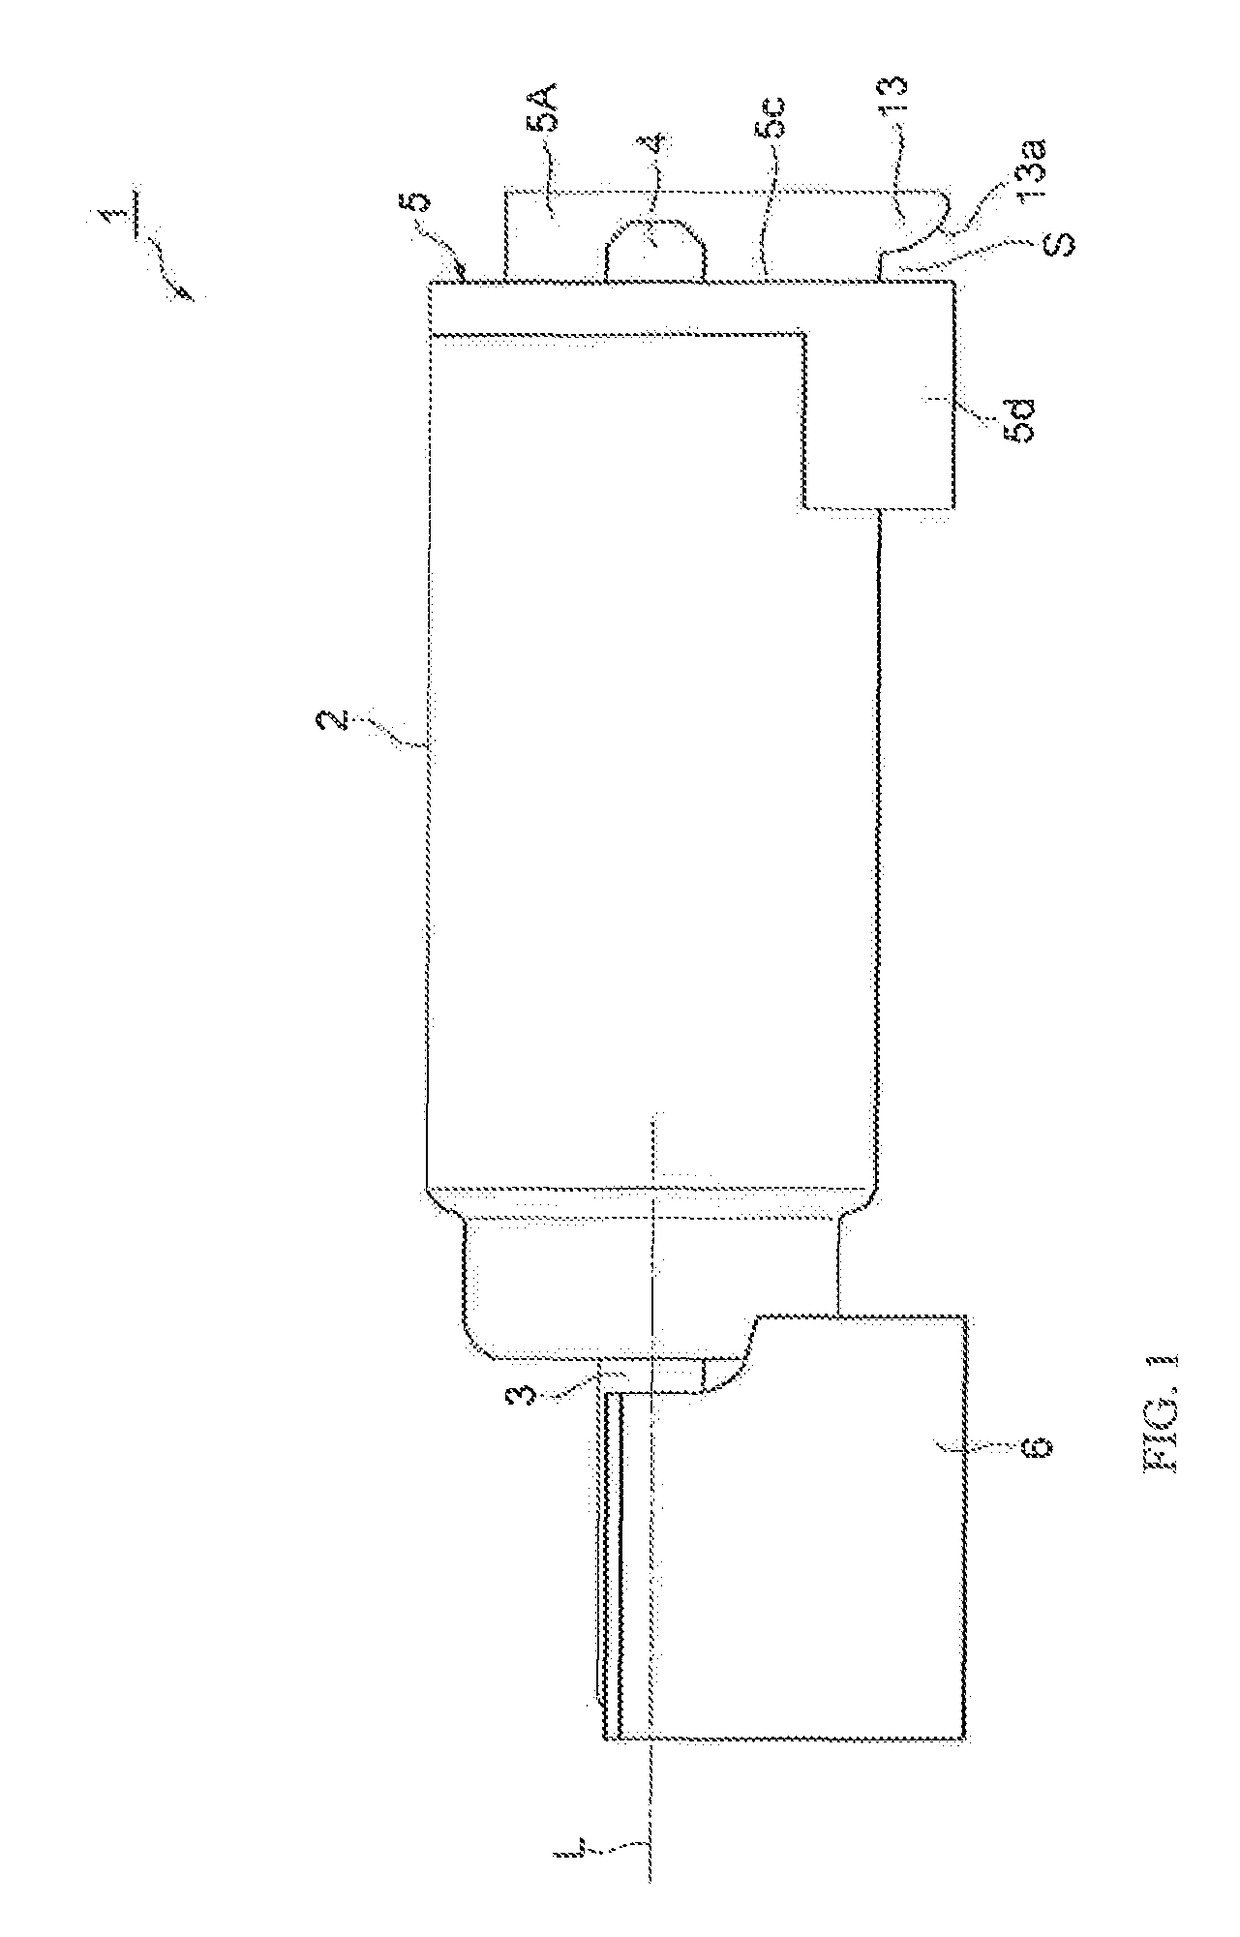 Vibrating compact motor with attached flexible circuit board for a mobile device